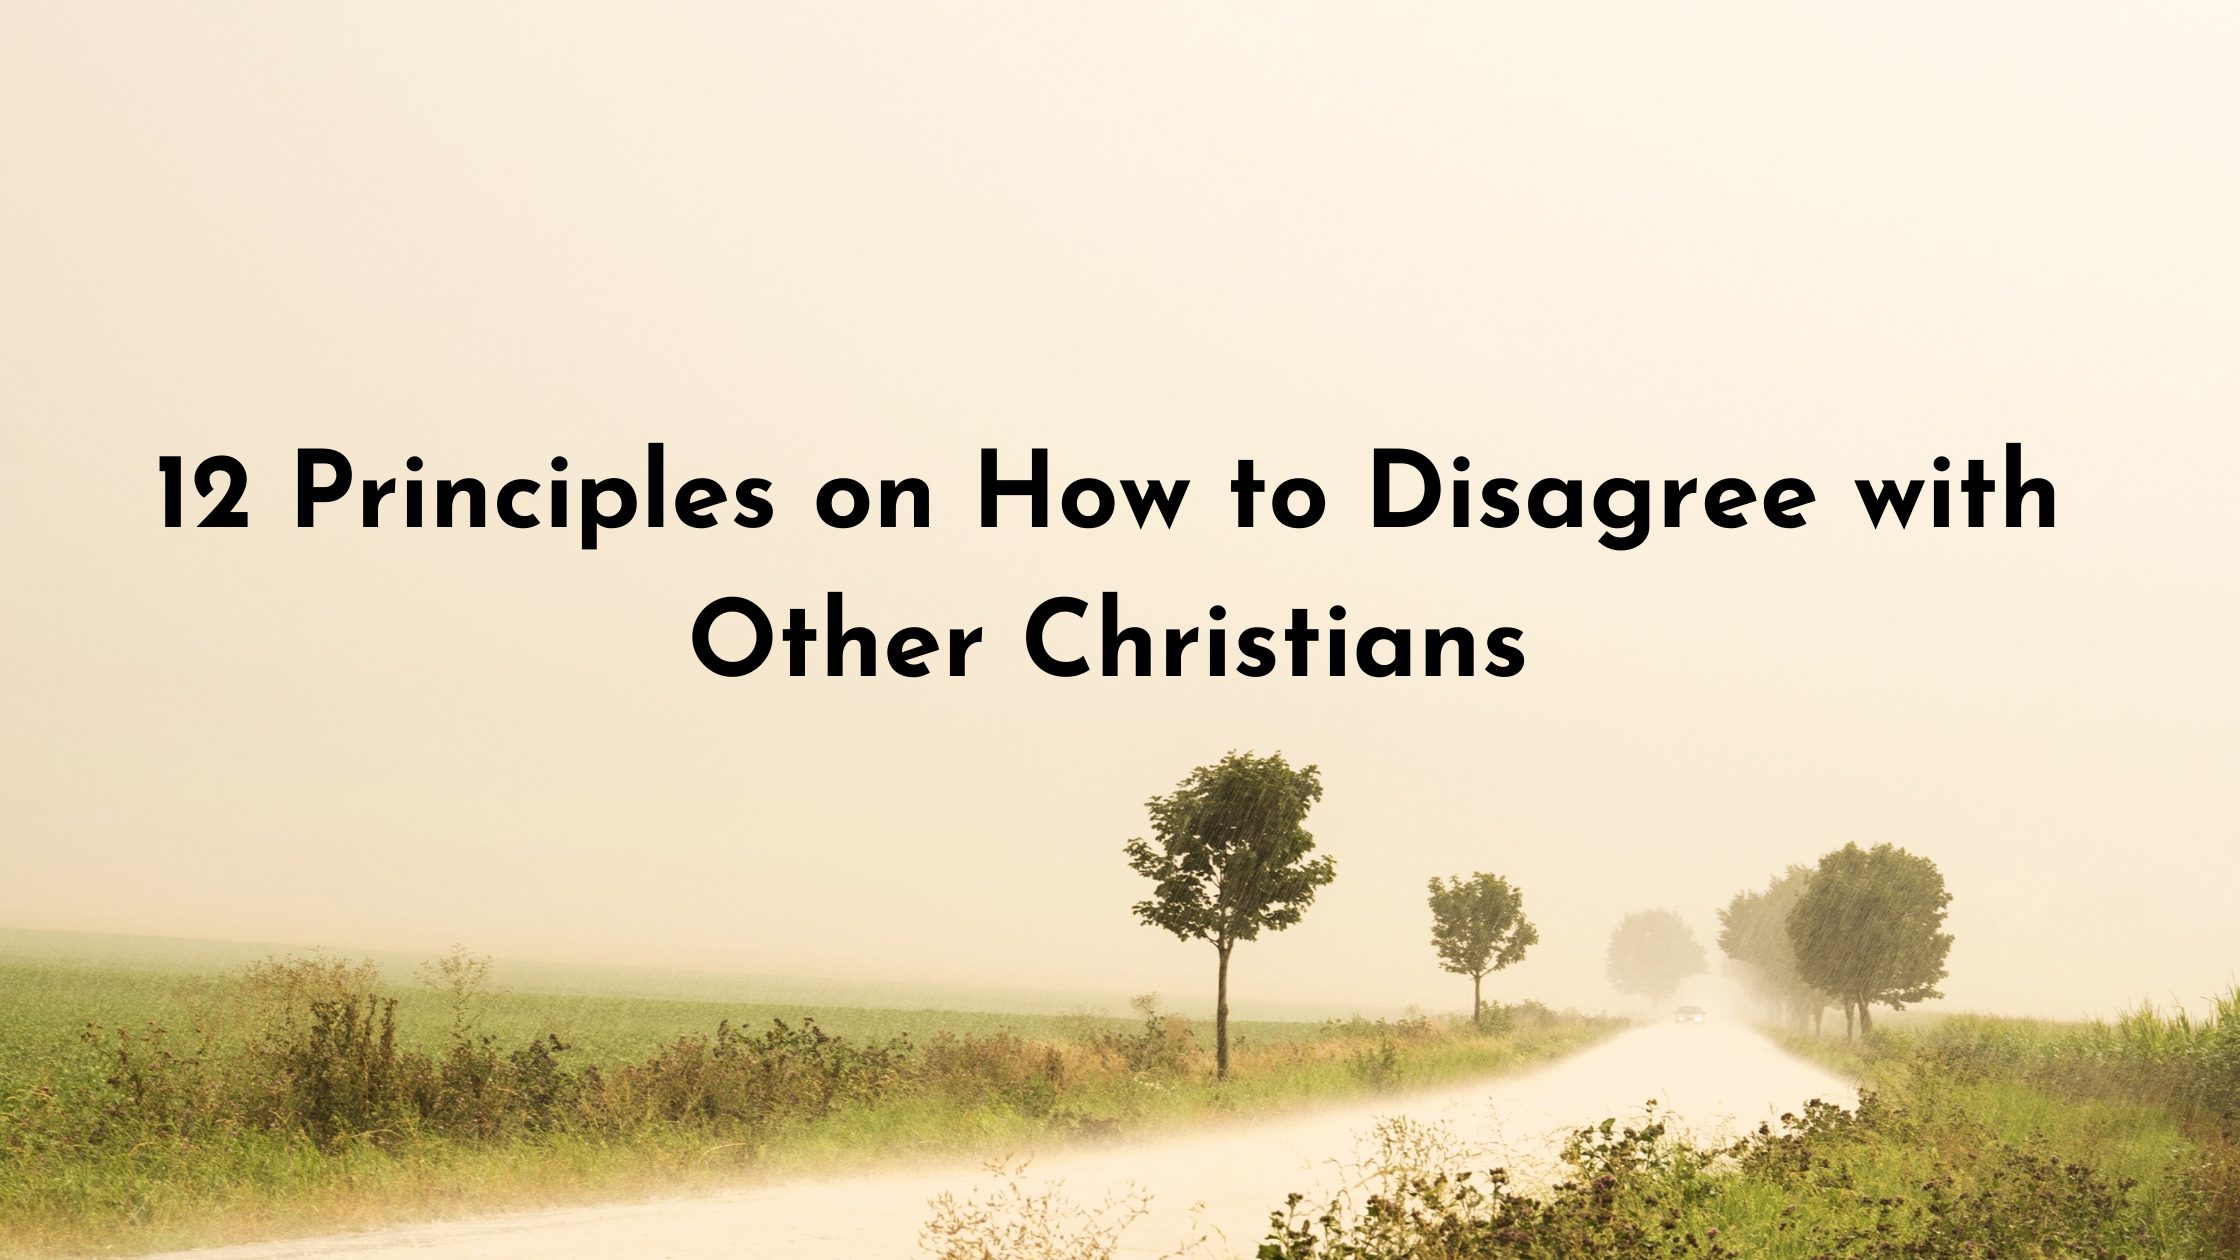 12 Principles on How to Disagree with Other Christians